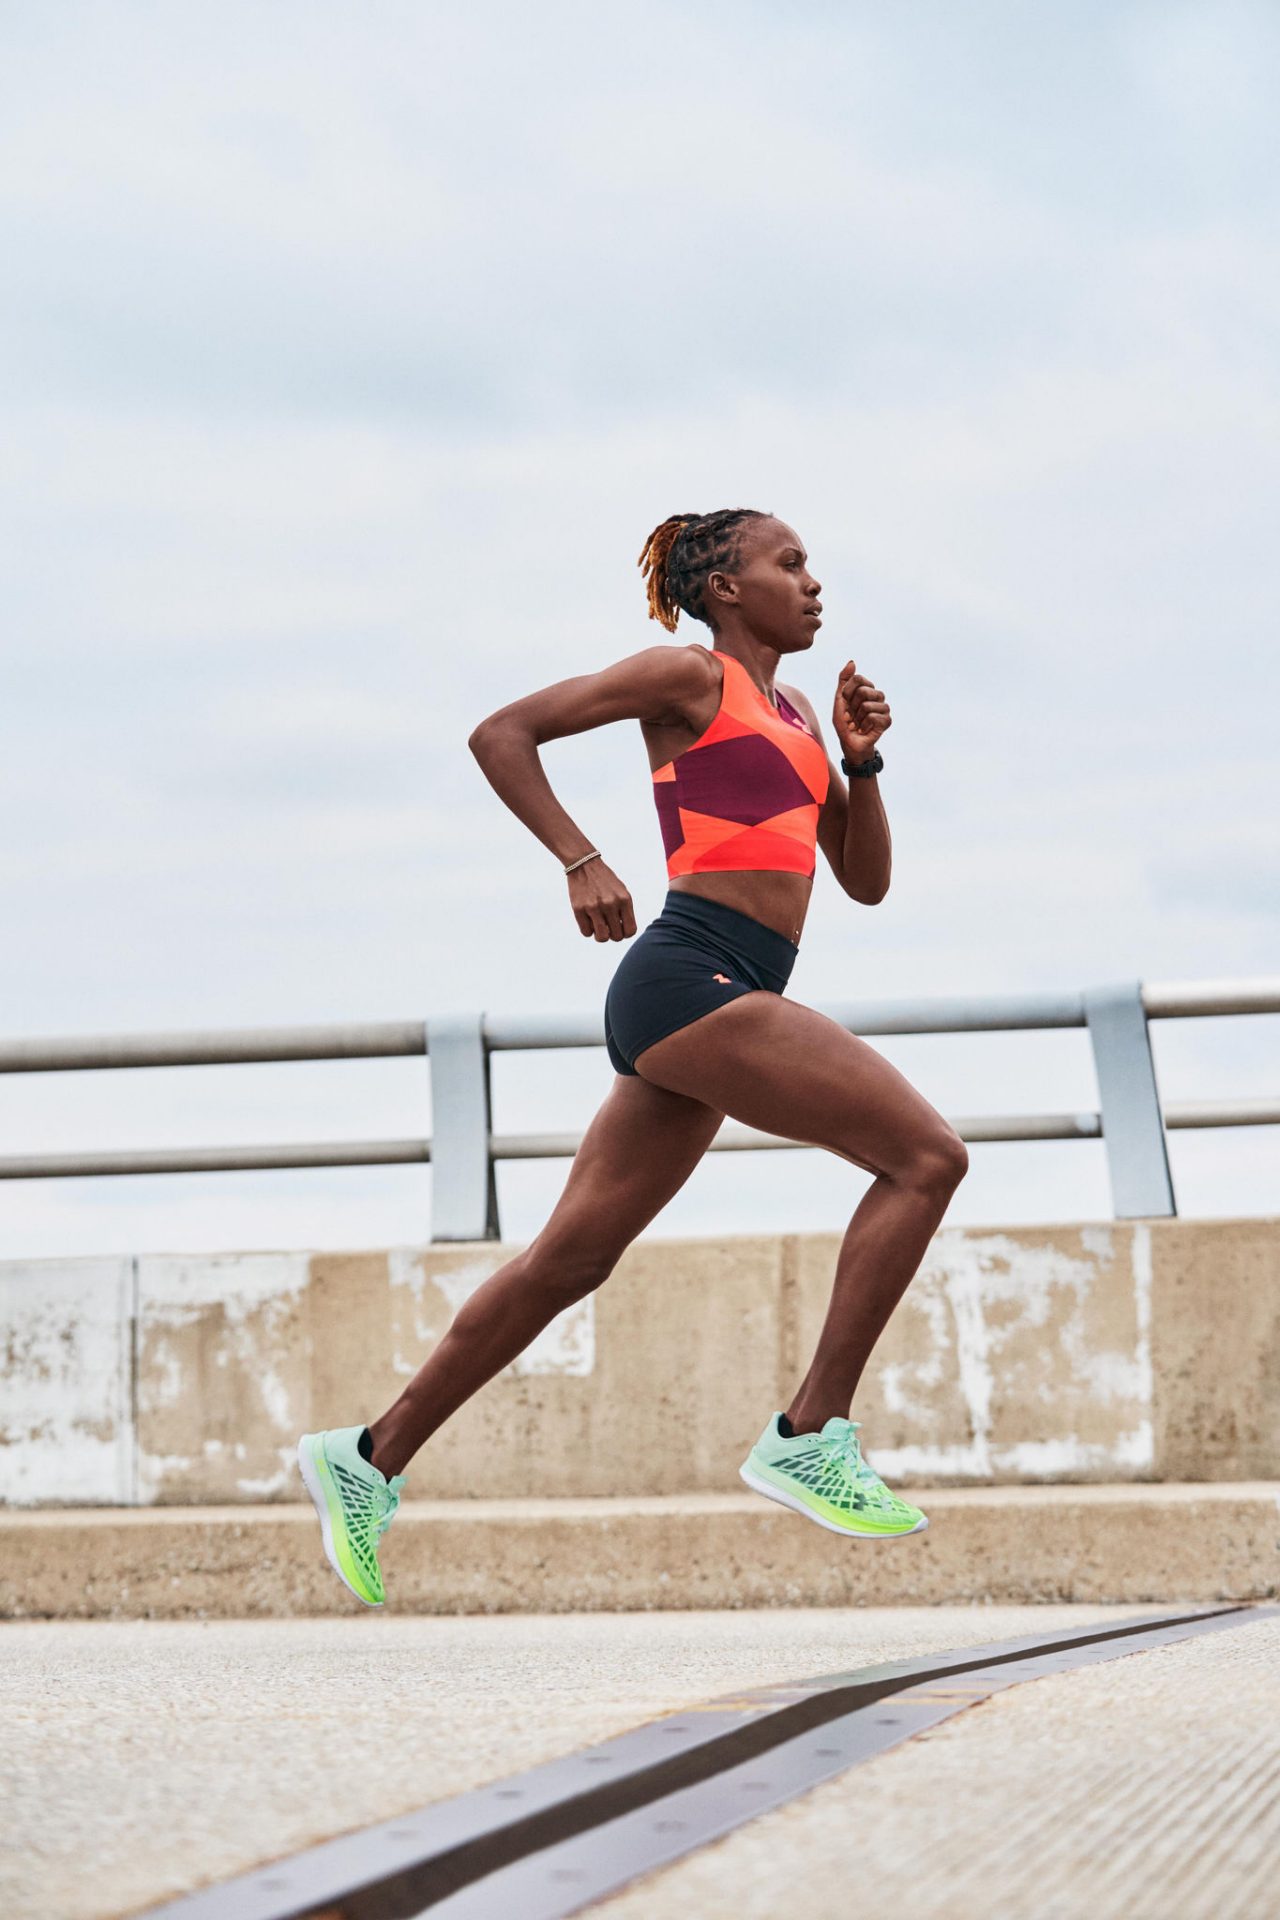 Fast Just Got Faster With Two New Run Footwear Innovations From Under ...